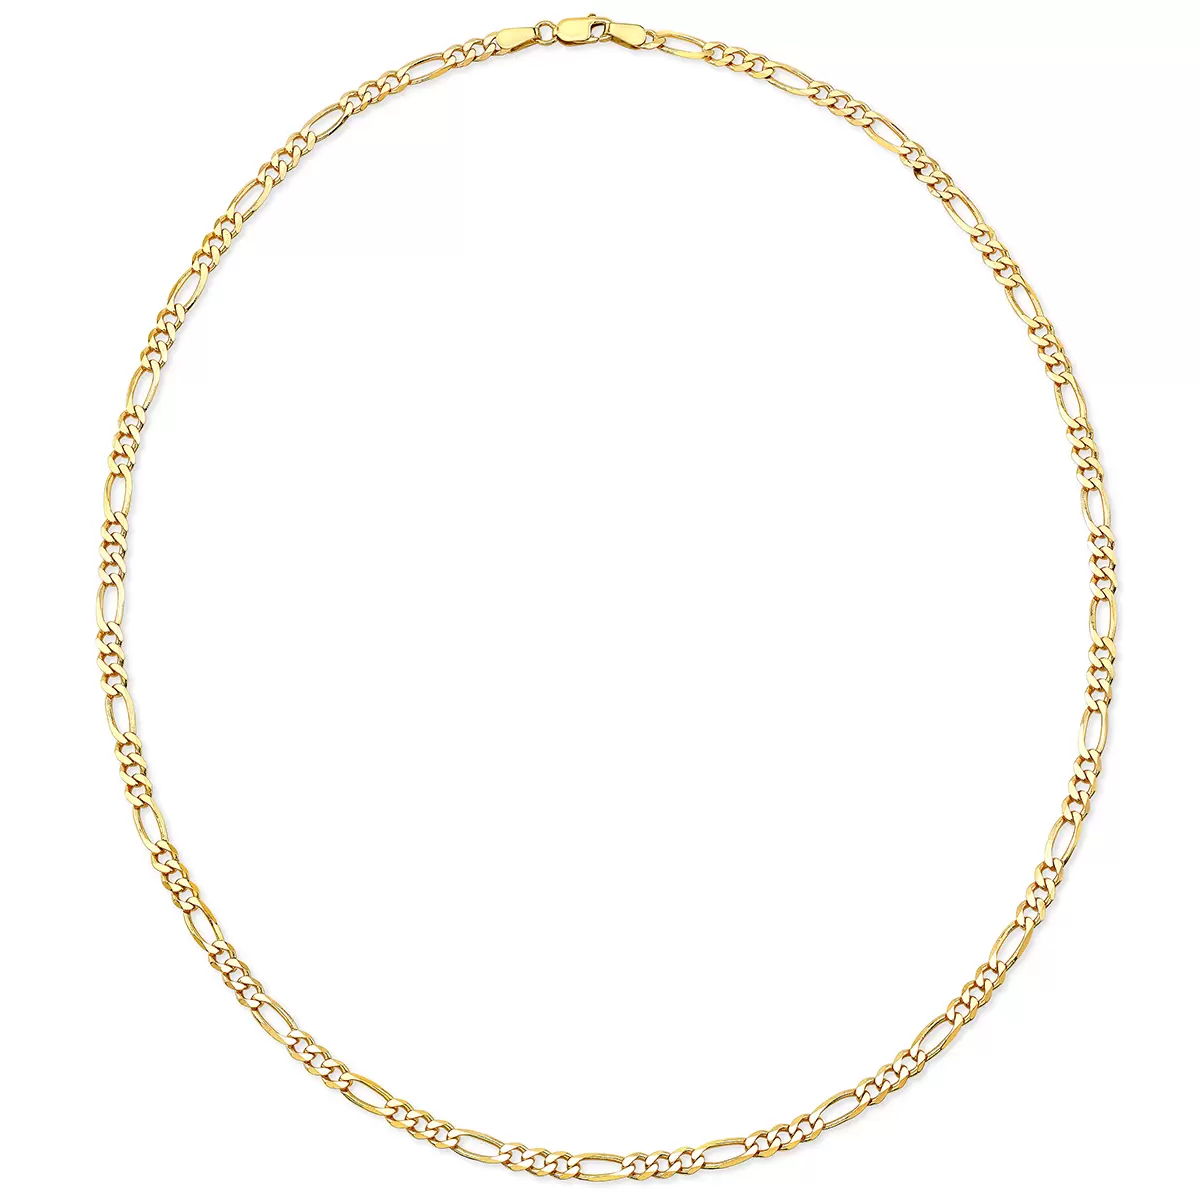 gold necklace on white background